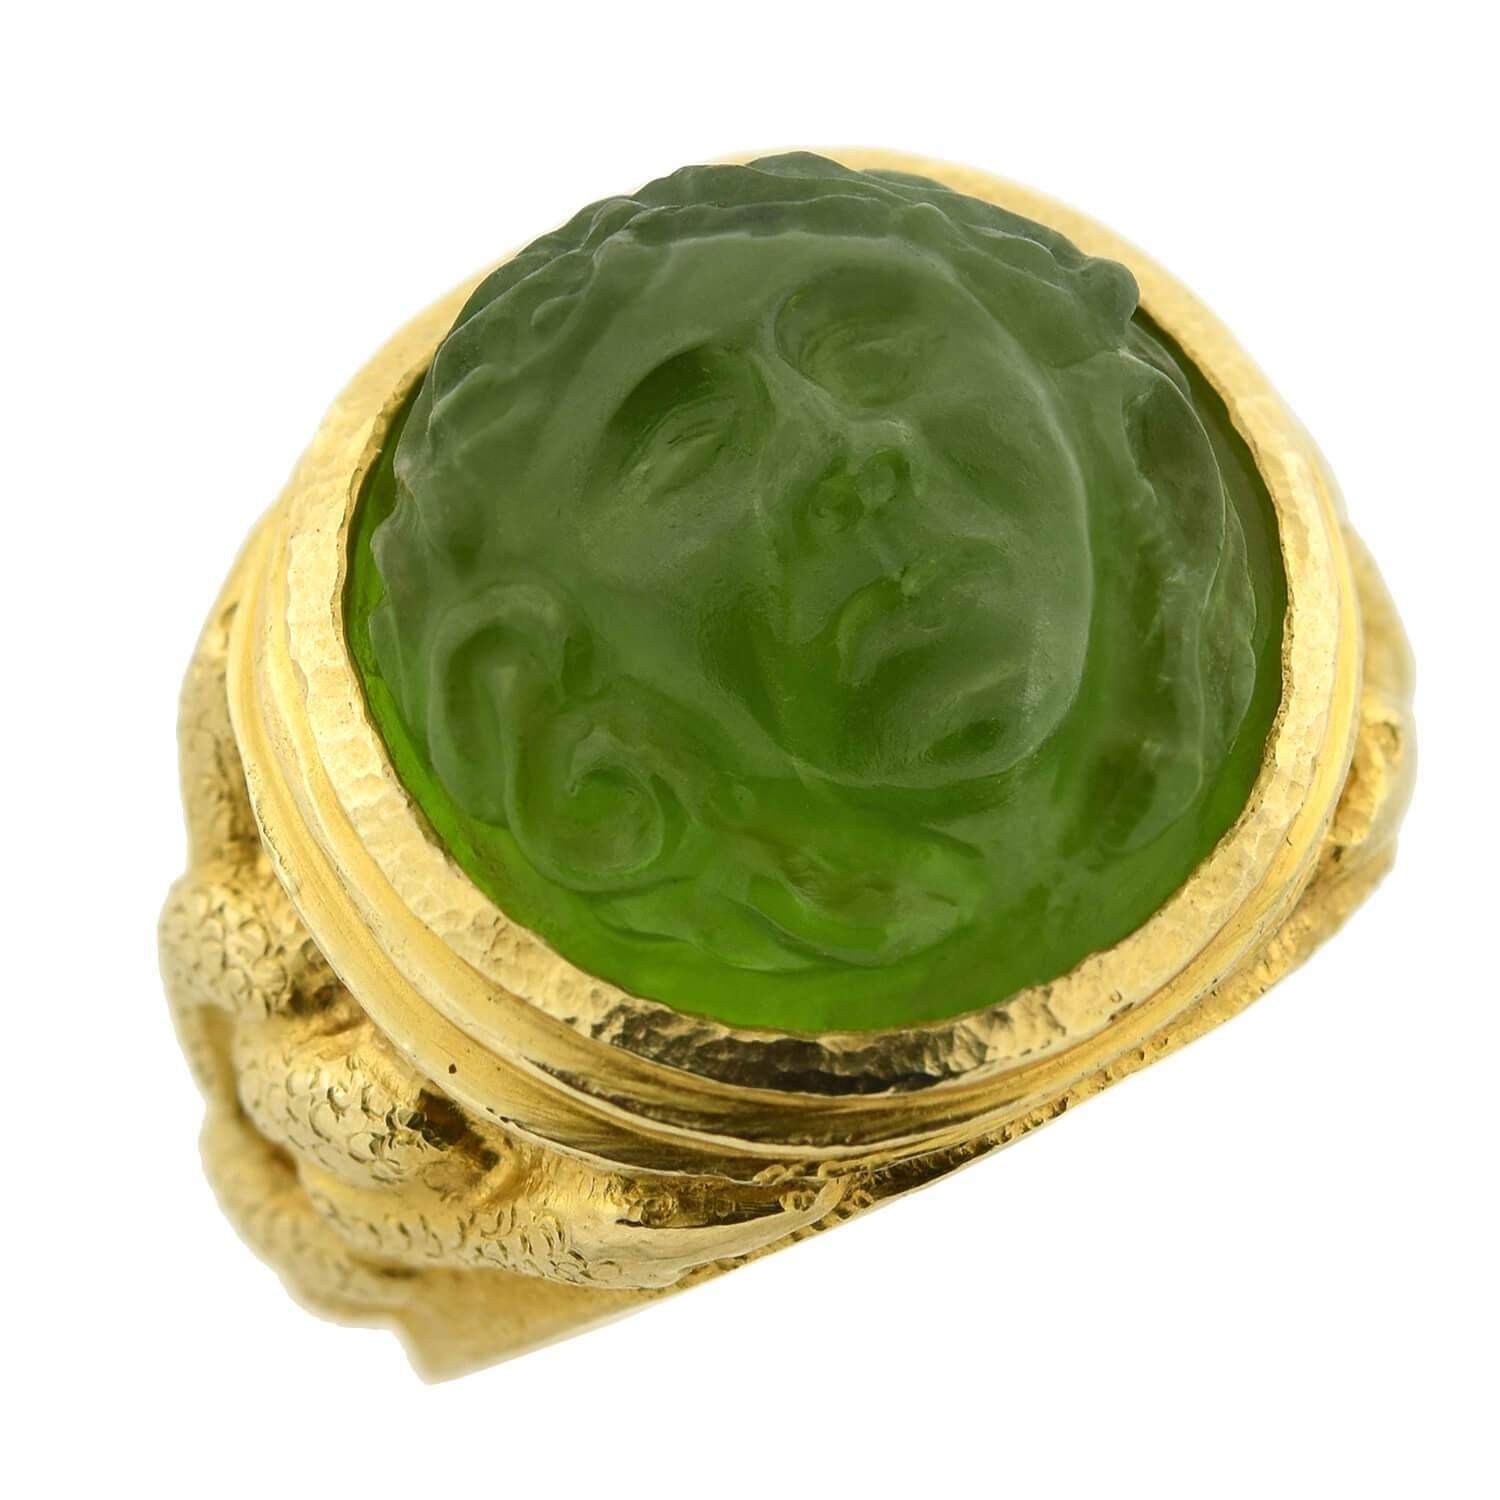 A stunning and unusual tourmaline ring from the Art Nouveau (ca1910) era! This alluring piece is crafted in 14kt yellow gold and features a single tourmaline cameo bezel set in the center. The tourmaline, which is substantial in size, is round in